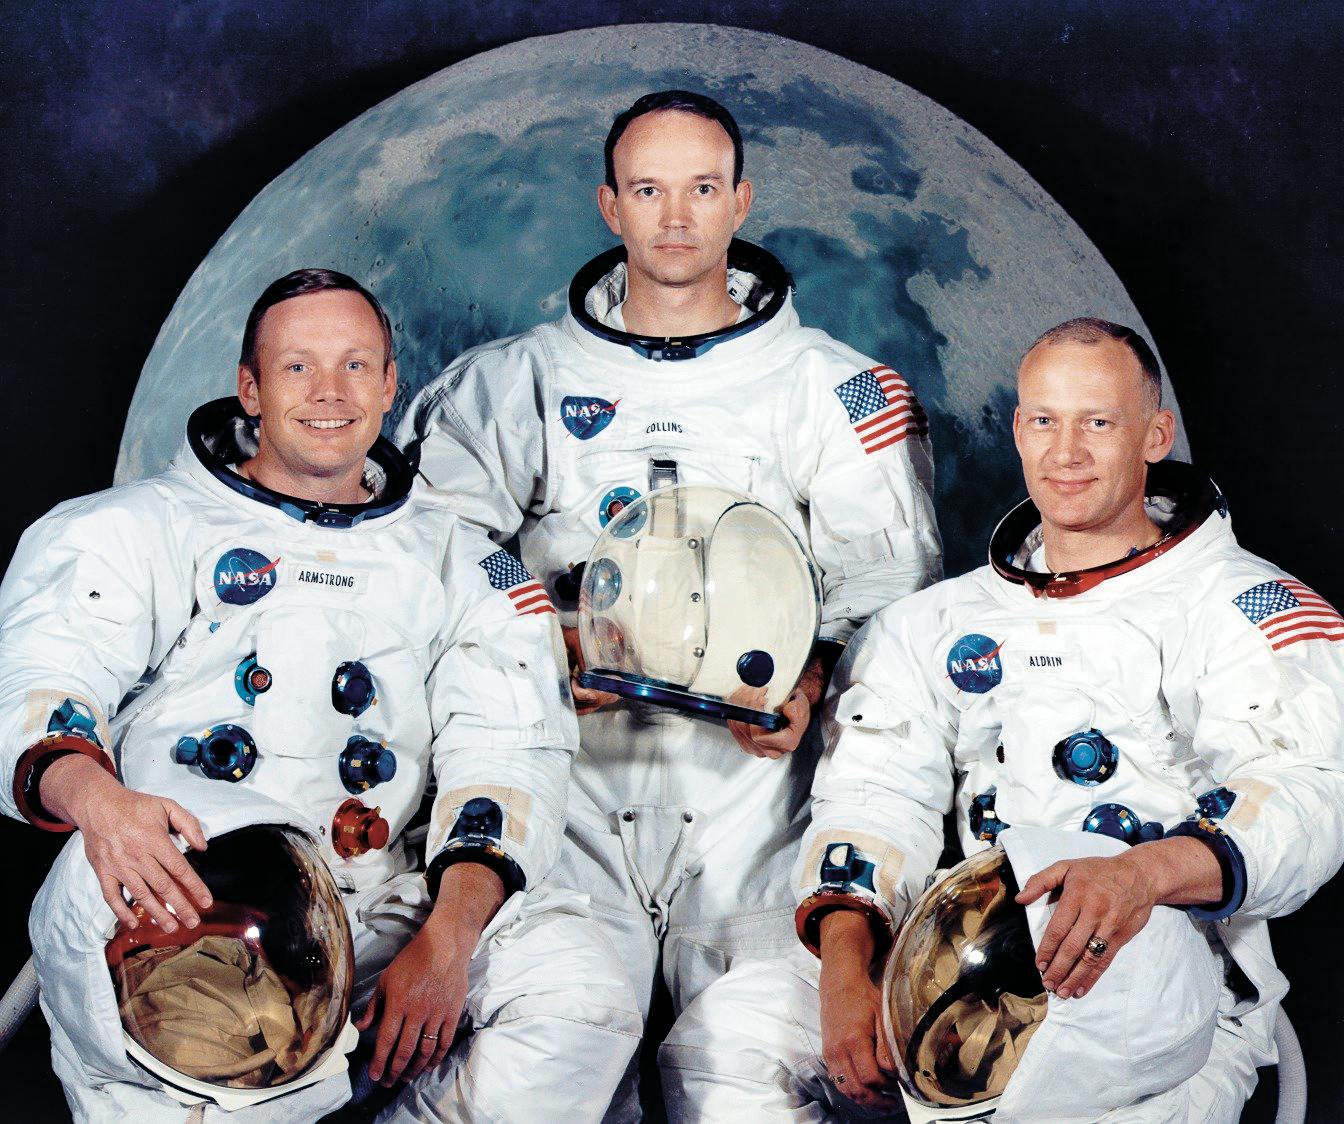 Armstrong, Michael Collins, and Aldrin pose for an official NASA portrait. 